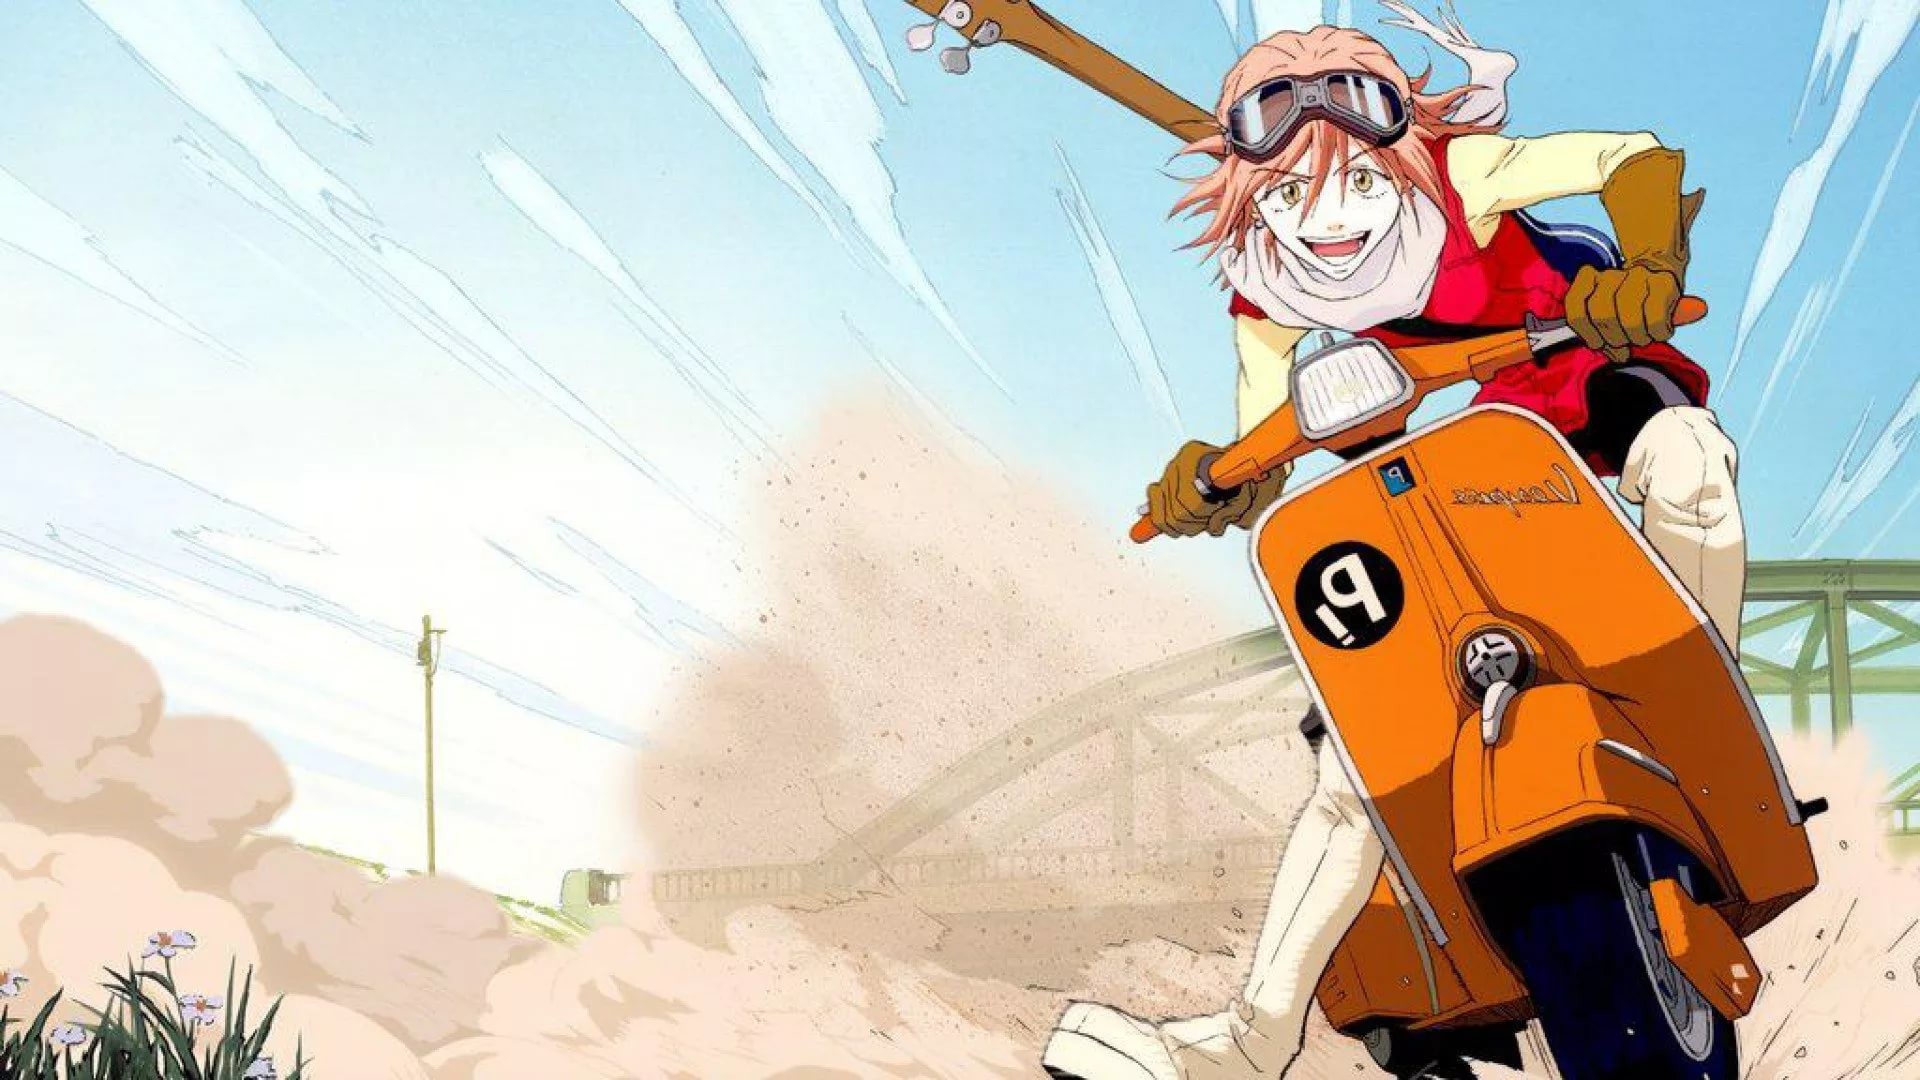 1920x1080 All Flcl wallpapers